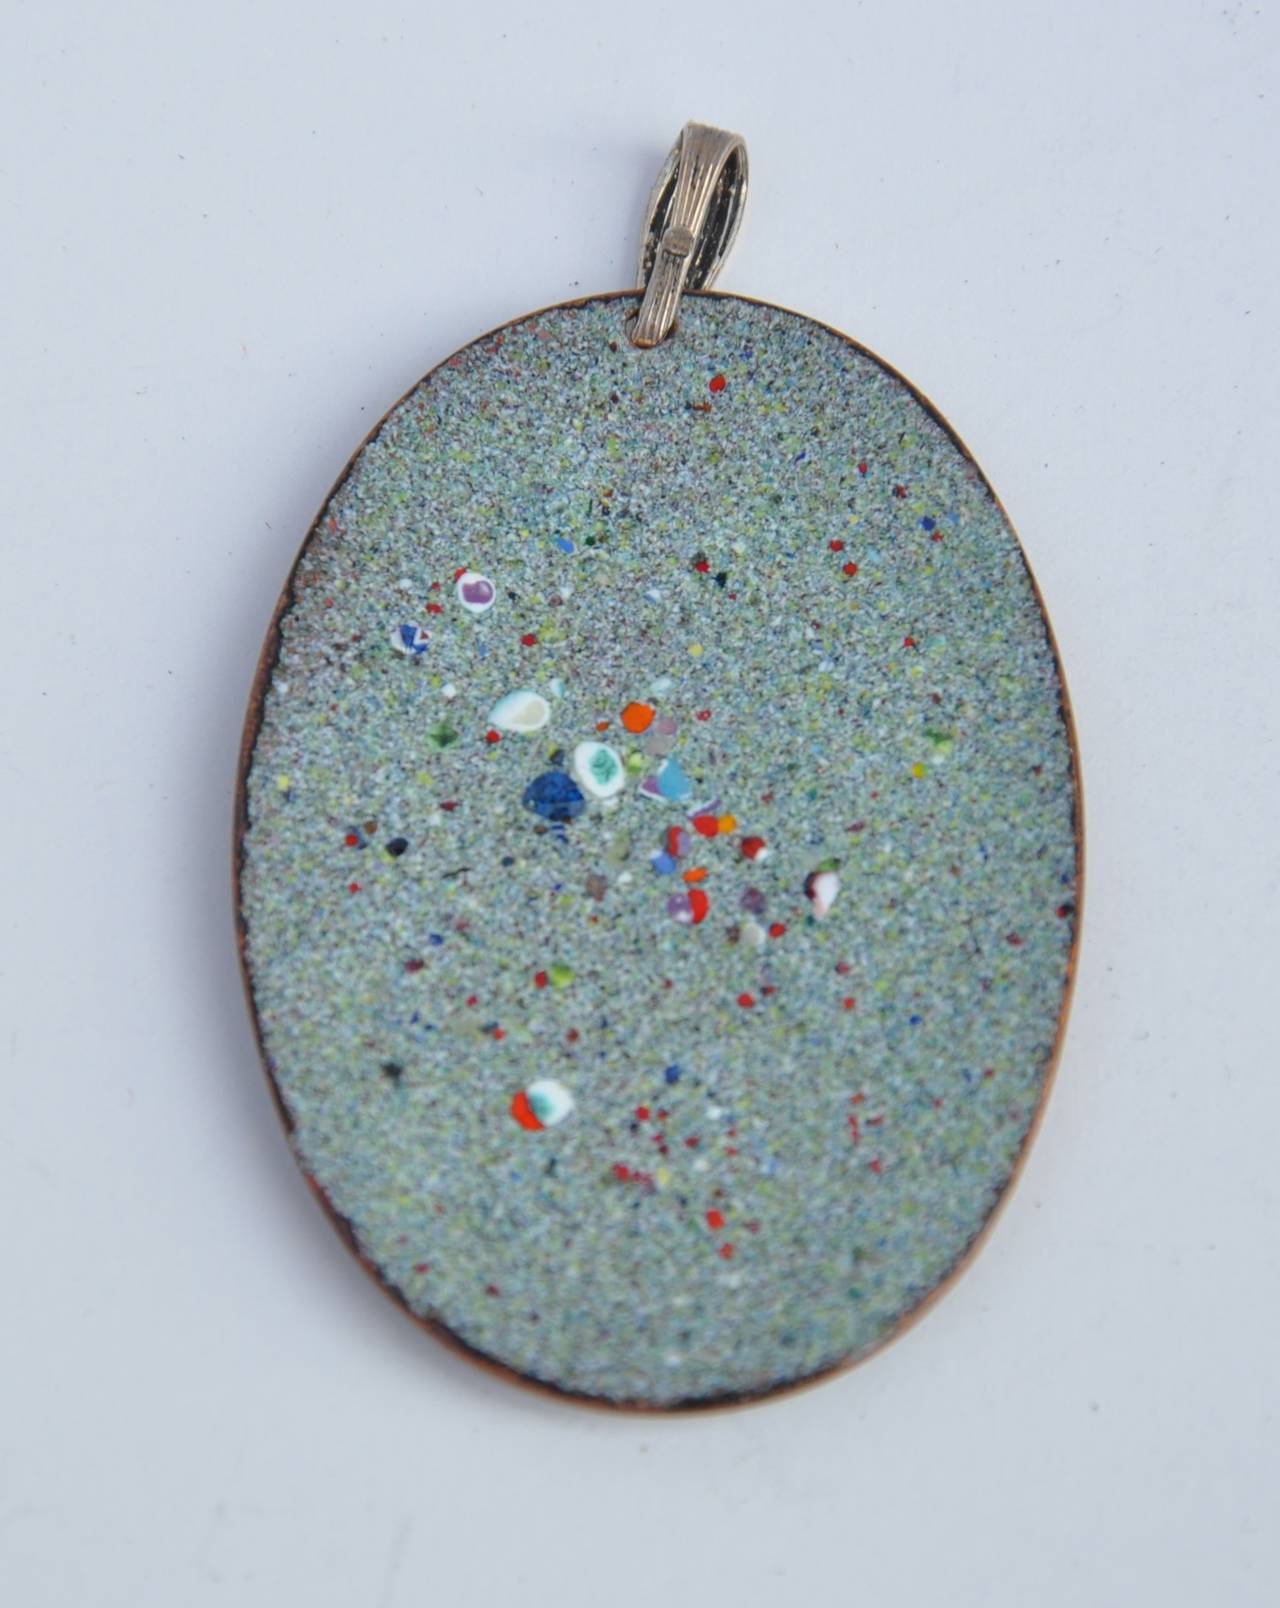      Multi-colors of baked enamel into a wonderful floral design pendant measures 2" in height and 1 1/2" in width.